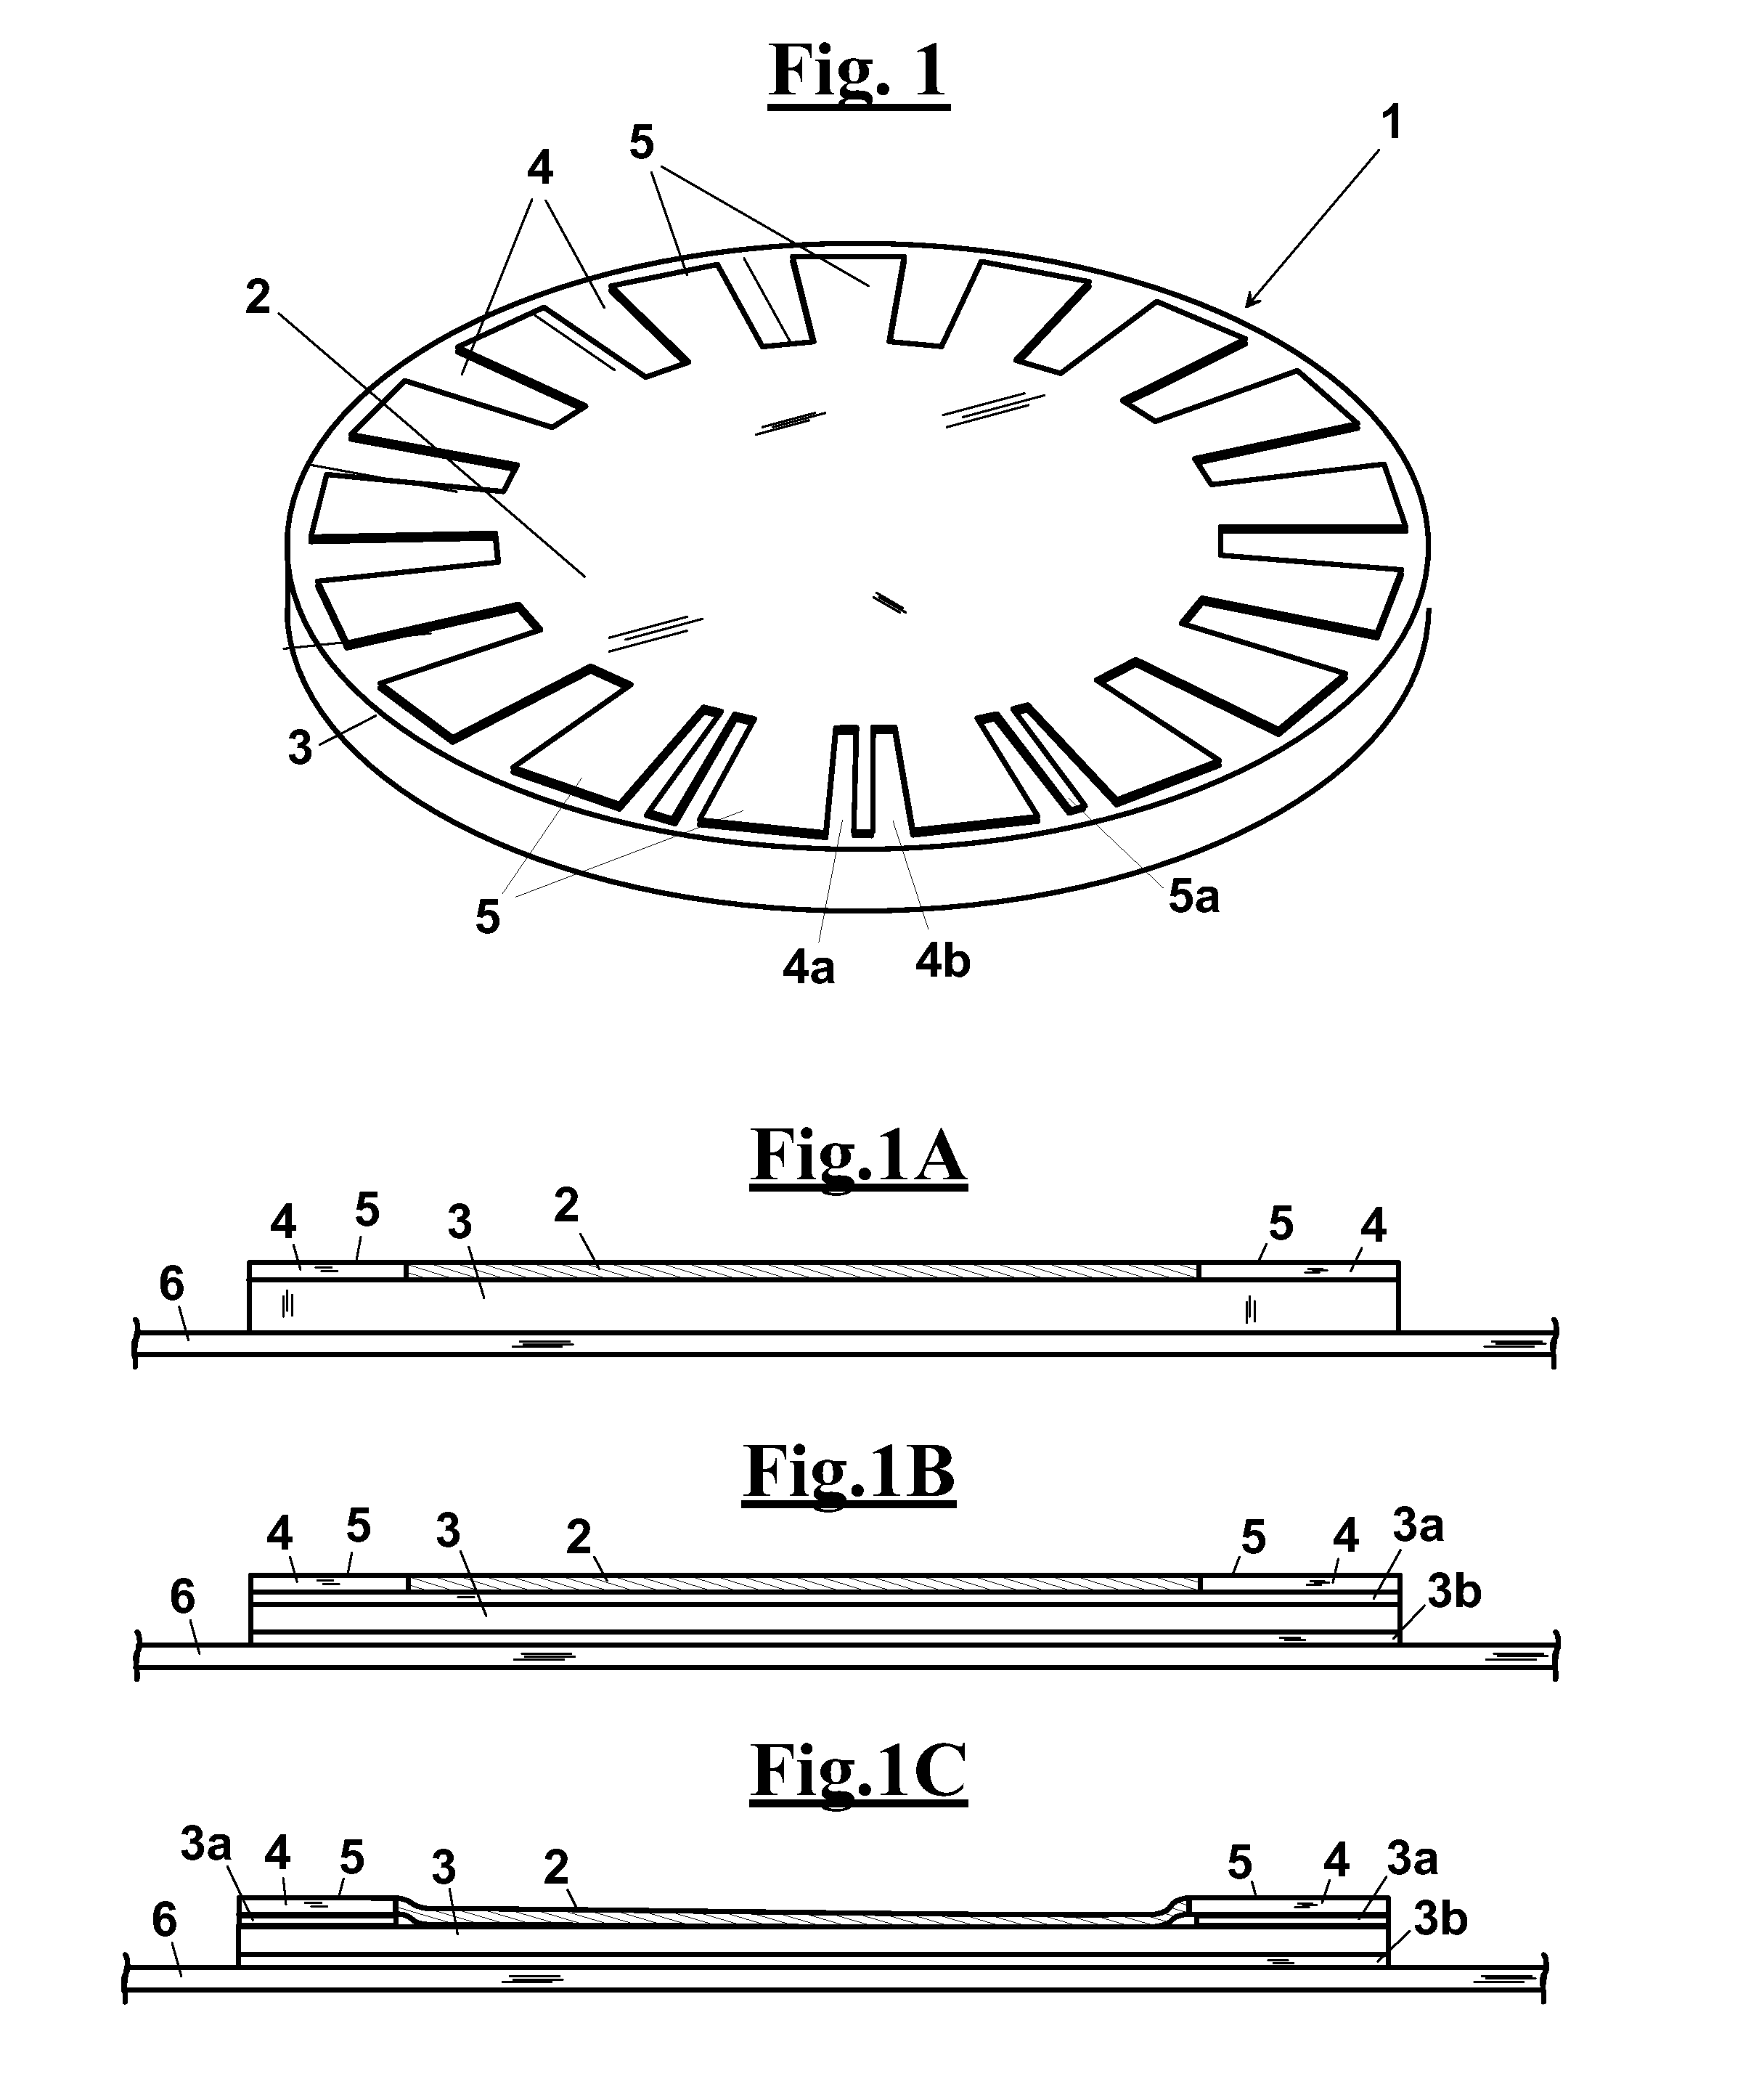 Circular semiconductor lasers having lattices for vertical emission